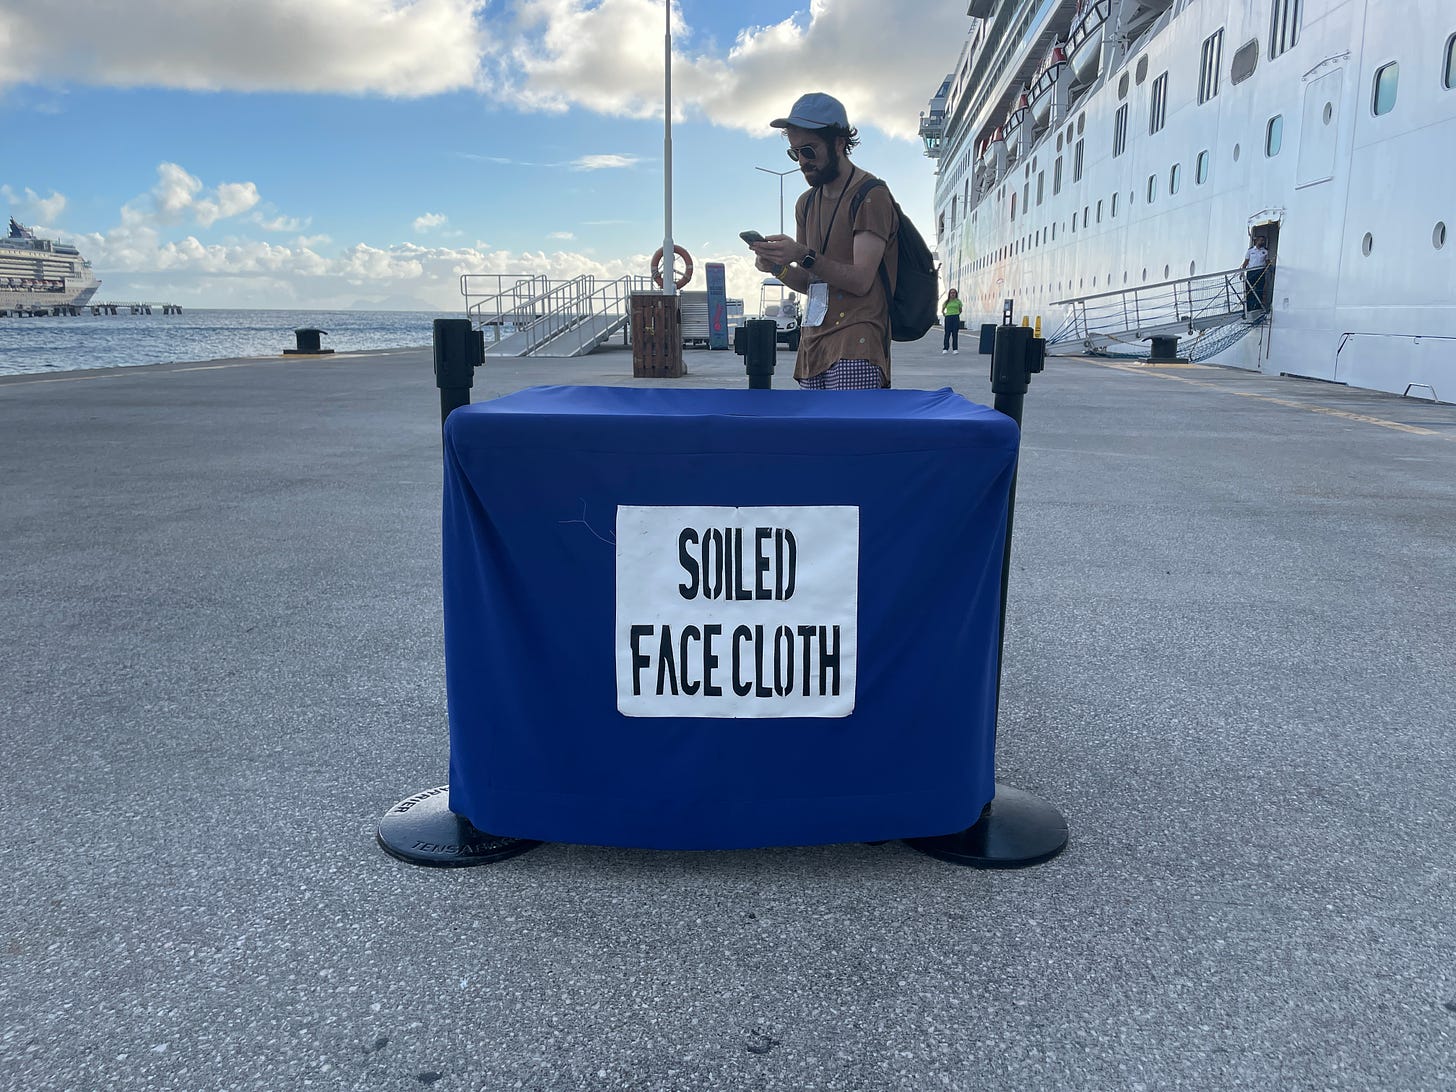 A receptacle for collecting used face clothes outside of the cruise ship at dock.